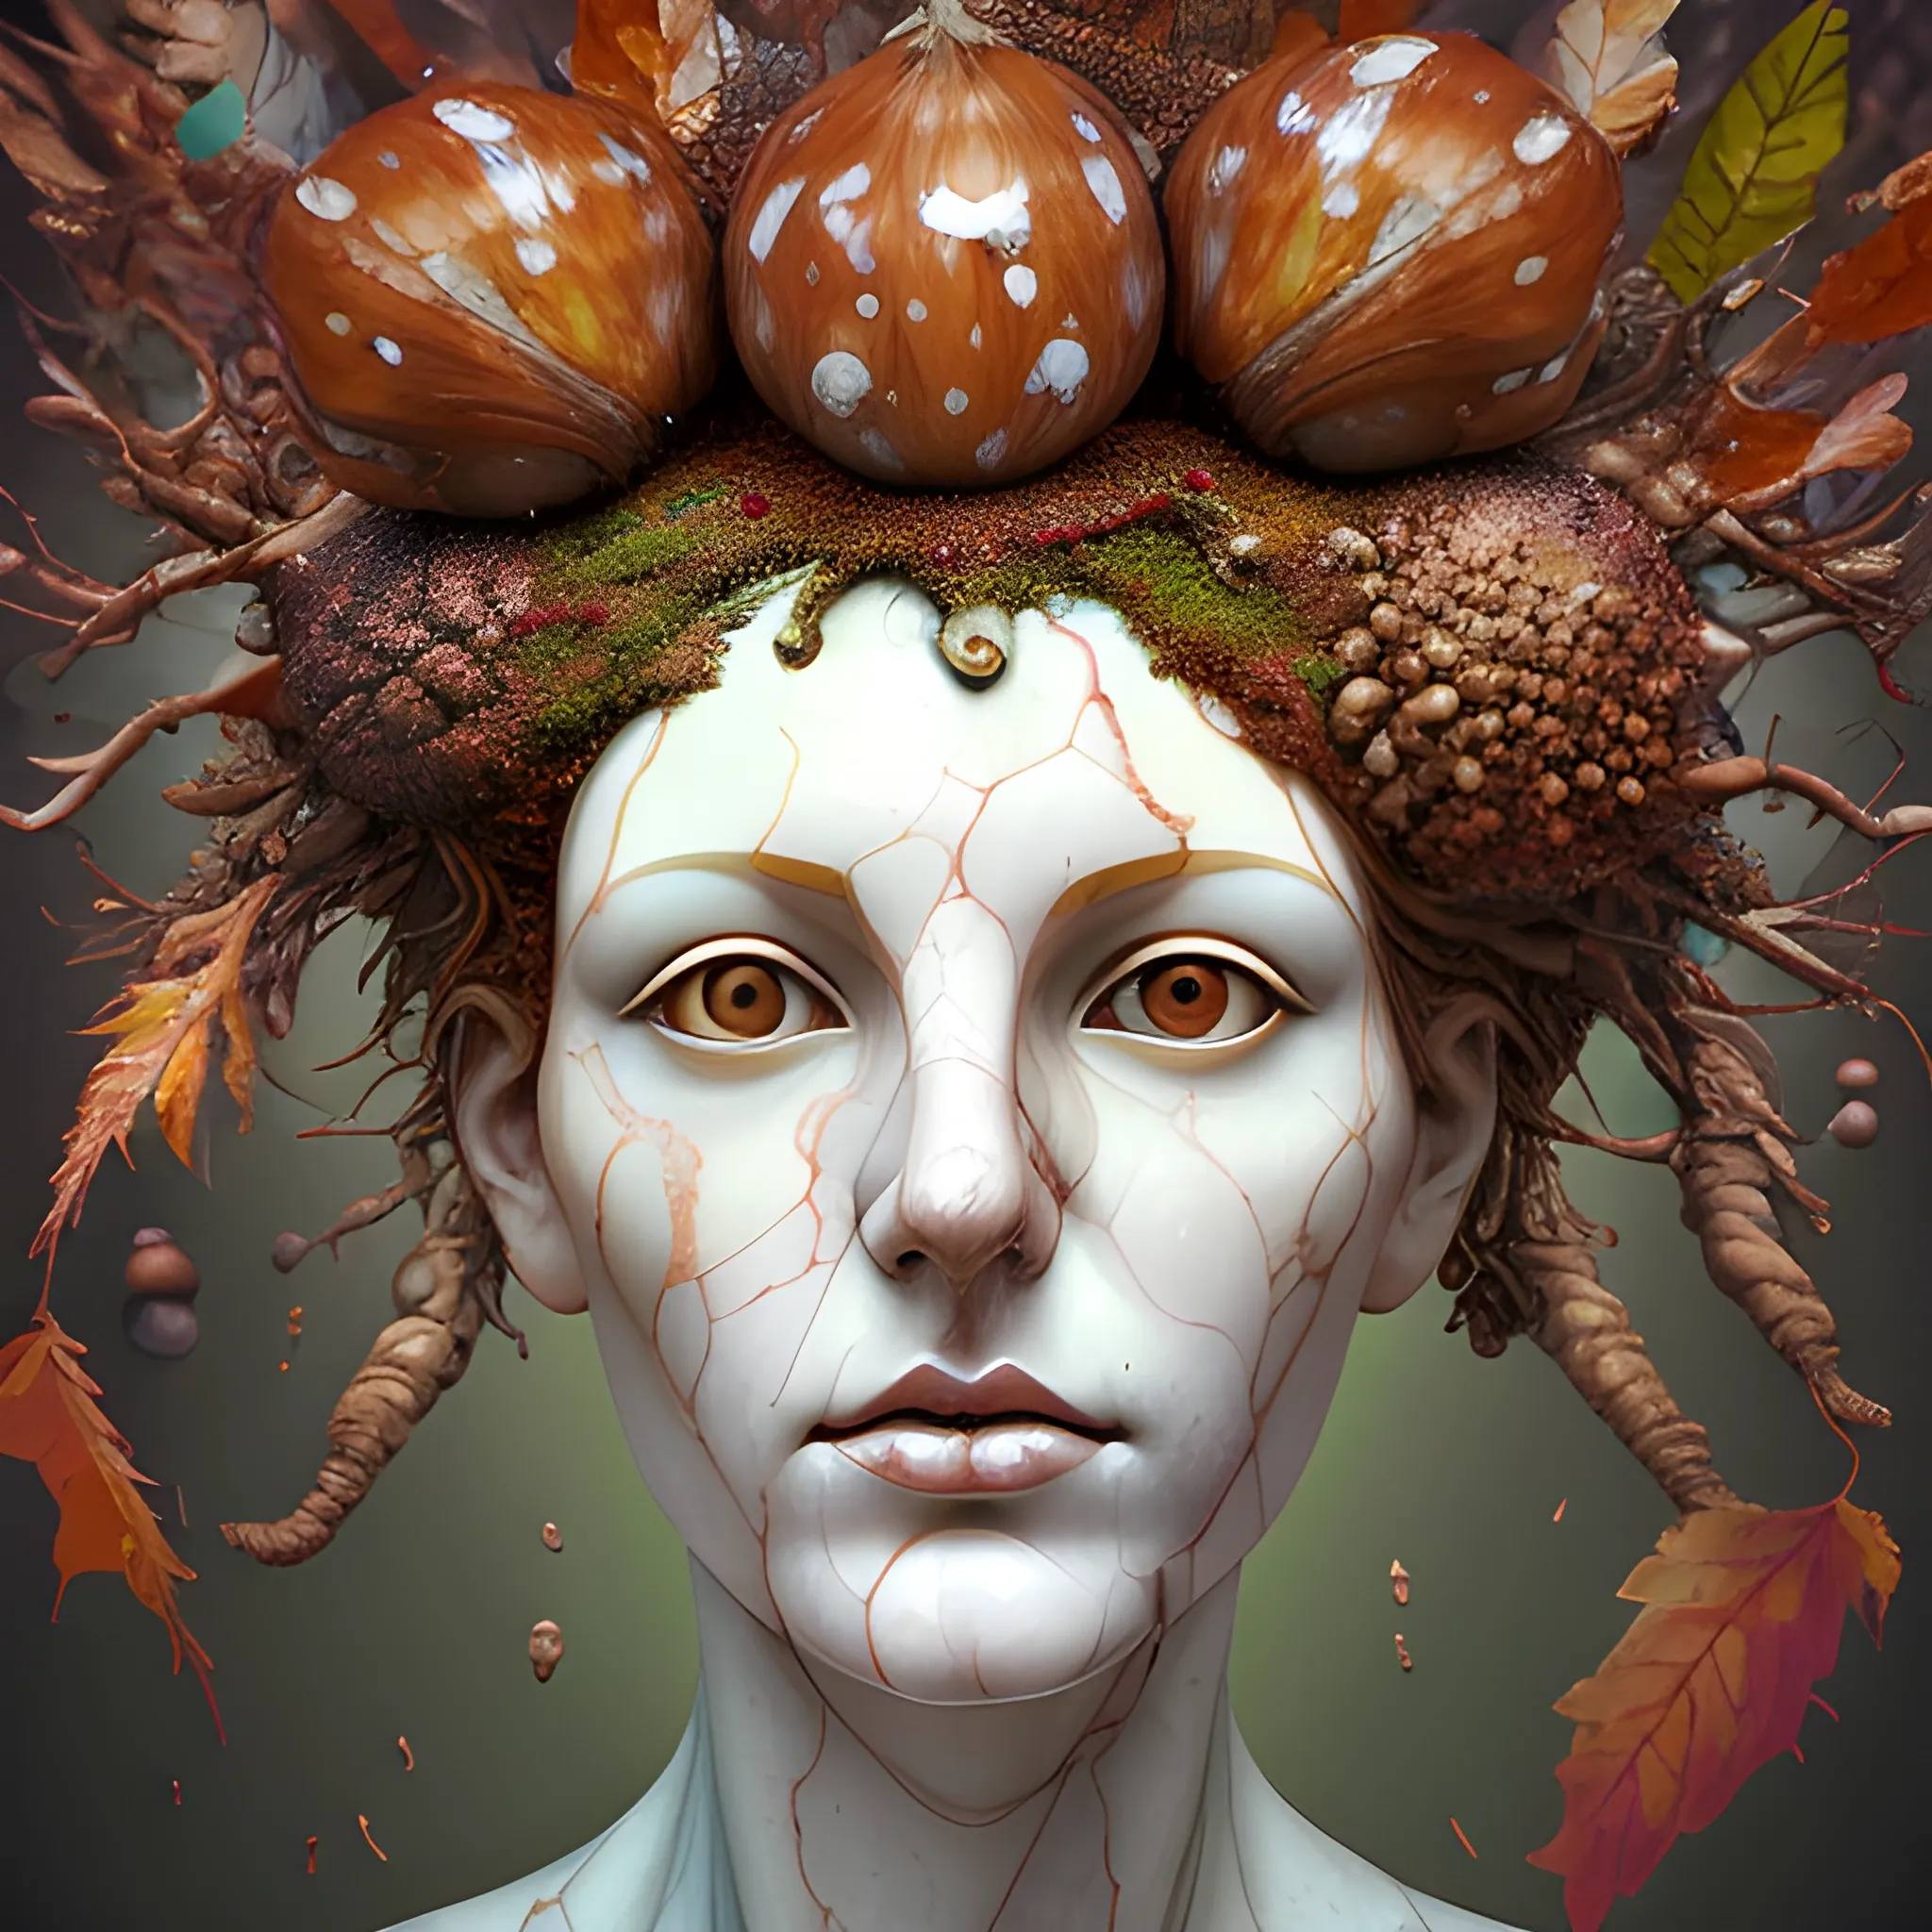  create a marble statue of a female human face to look like many crazy chestnuts, close up, saturated colors, surrealism, chaotic background many chestnuts and chestnut leaves floating around  3D, Trippy, eerie atmosphere, close up, illustration, angular perspective, Oil Painting, Water Color